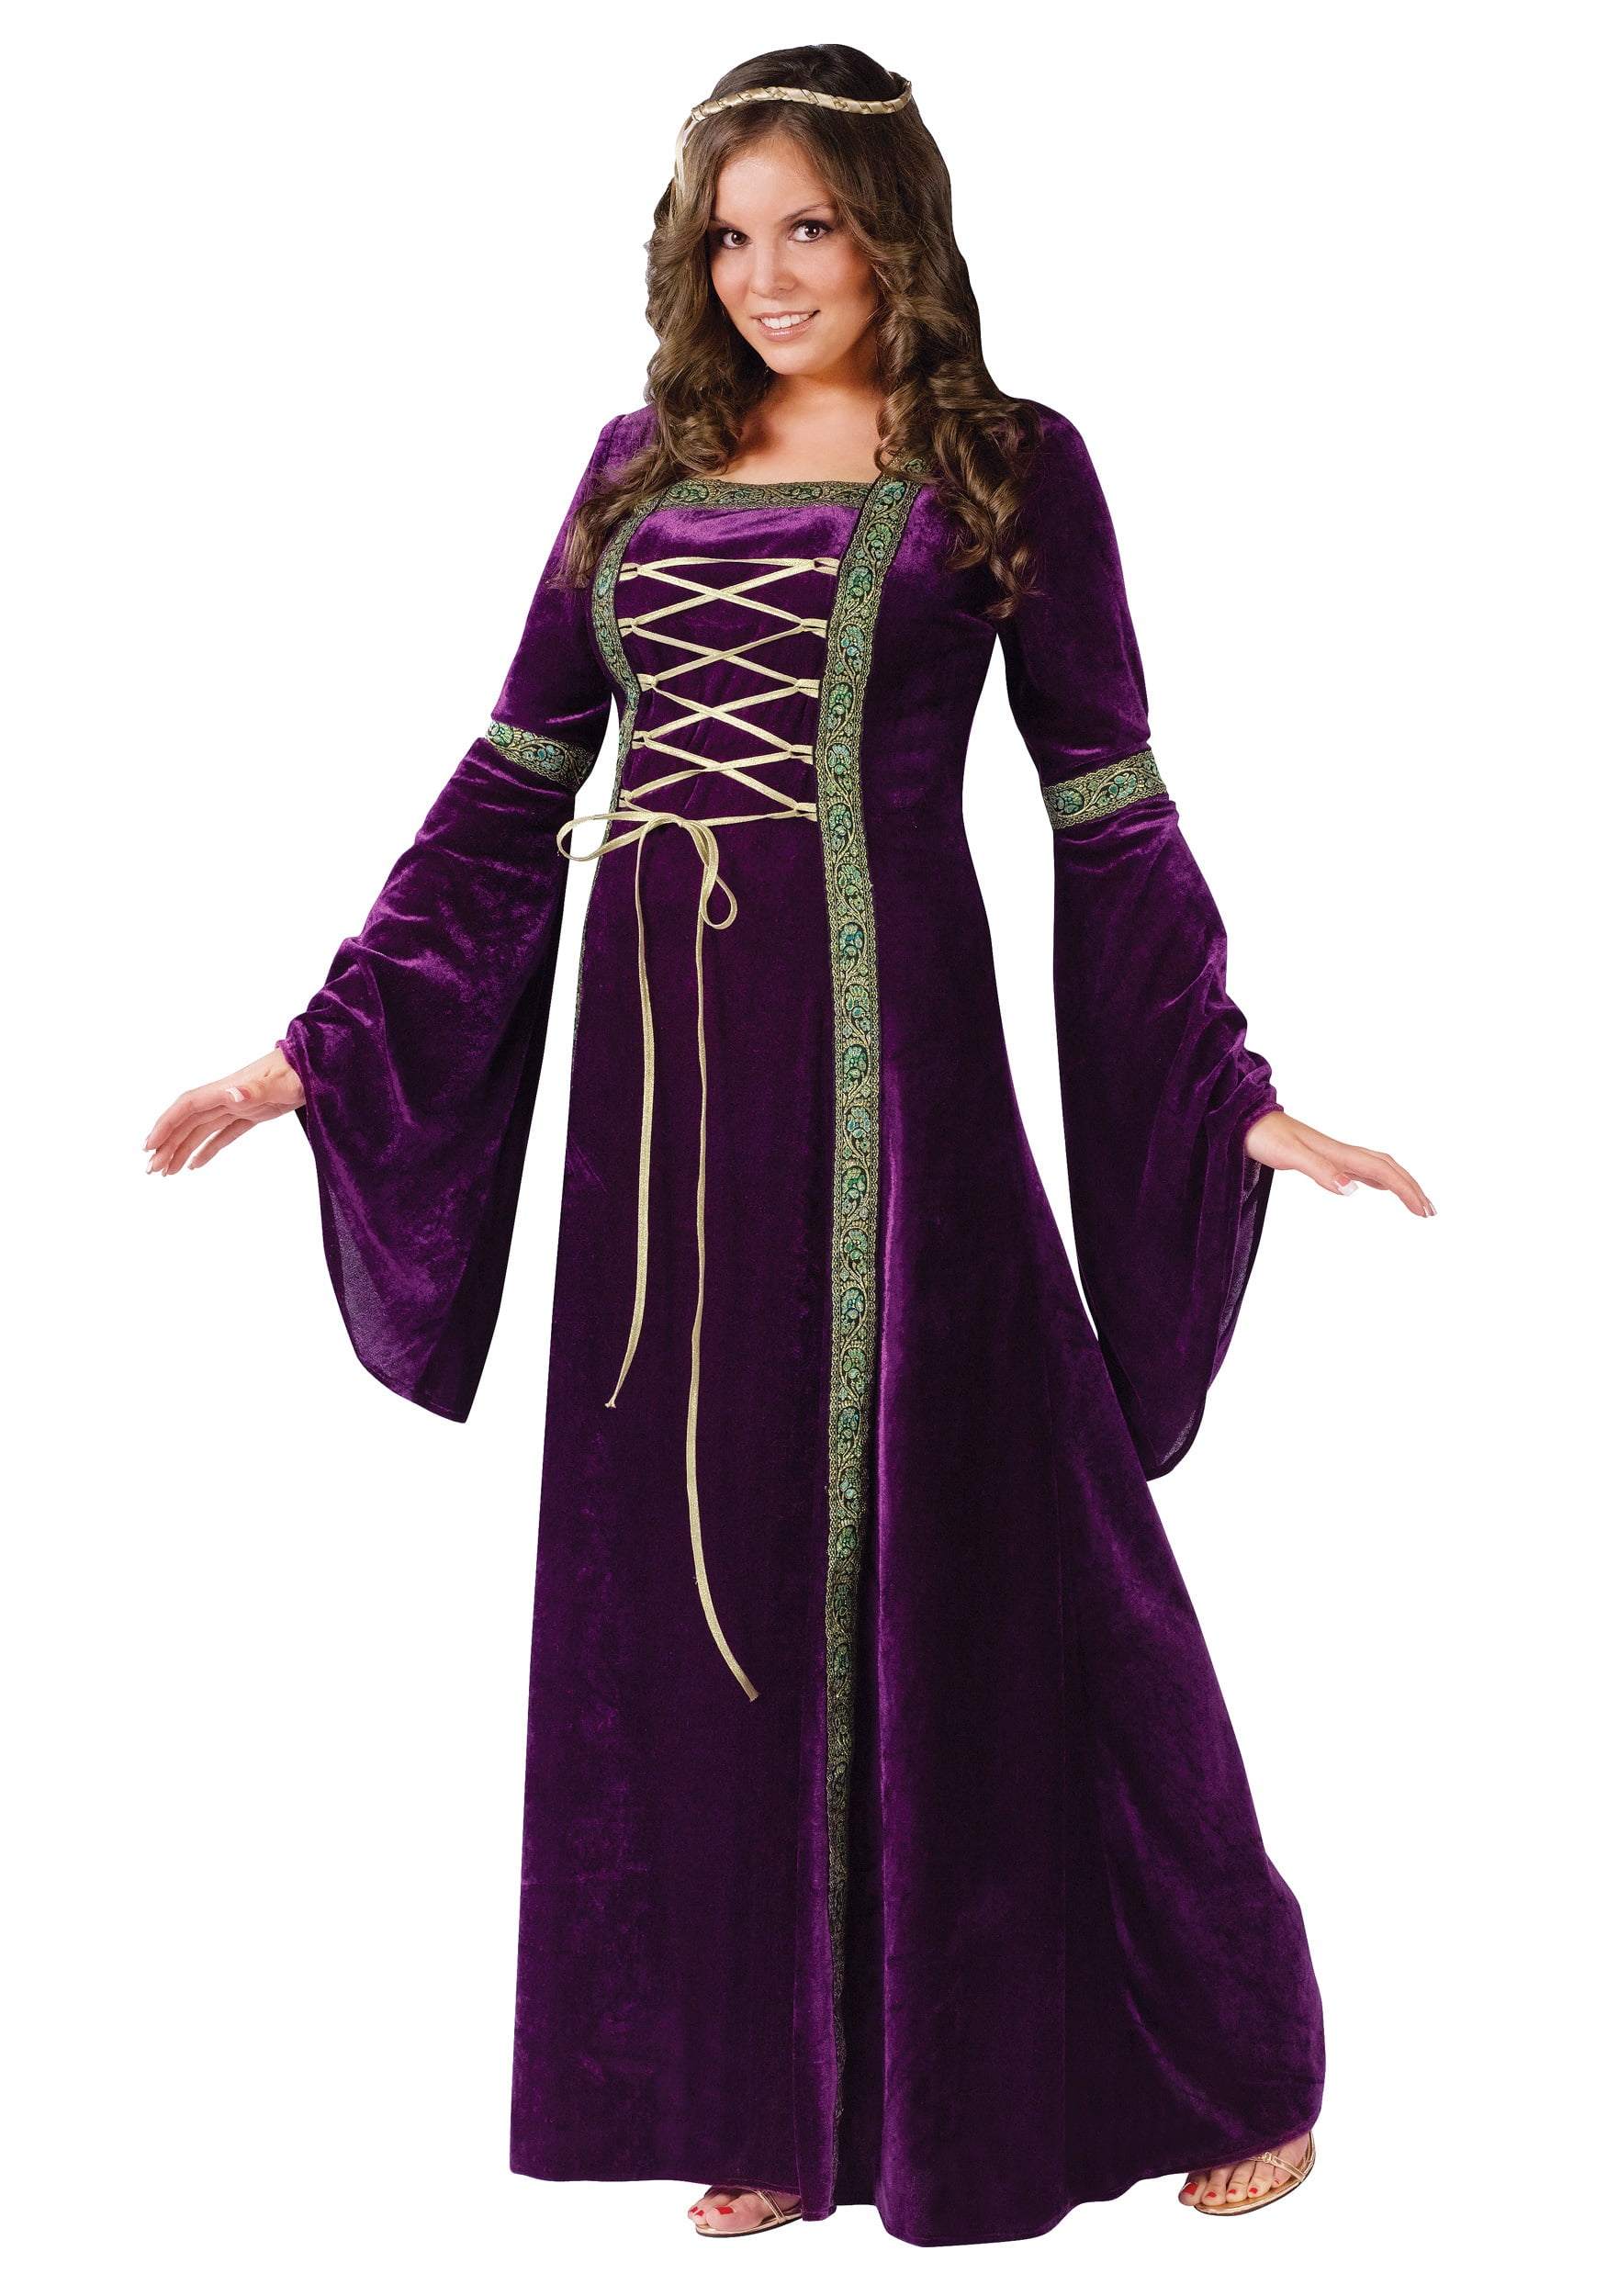 Adult Plus Size Lady Guinevere Costume Medieval Queen Fancy Dress Outfit New 